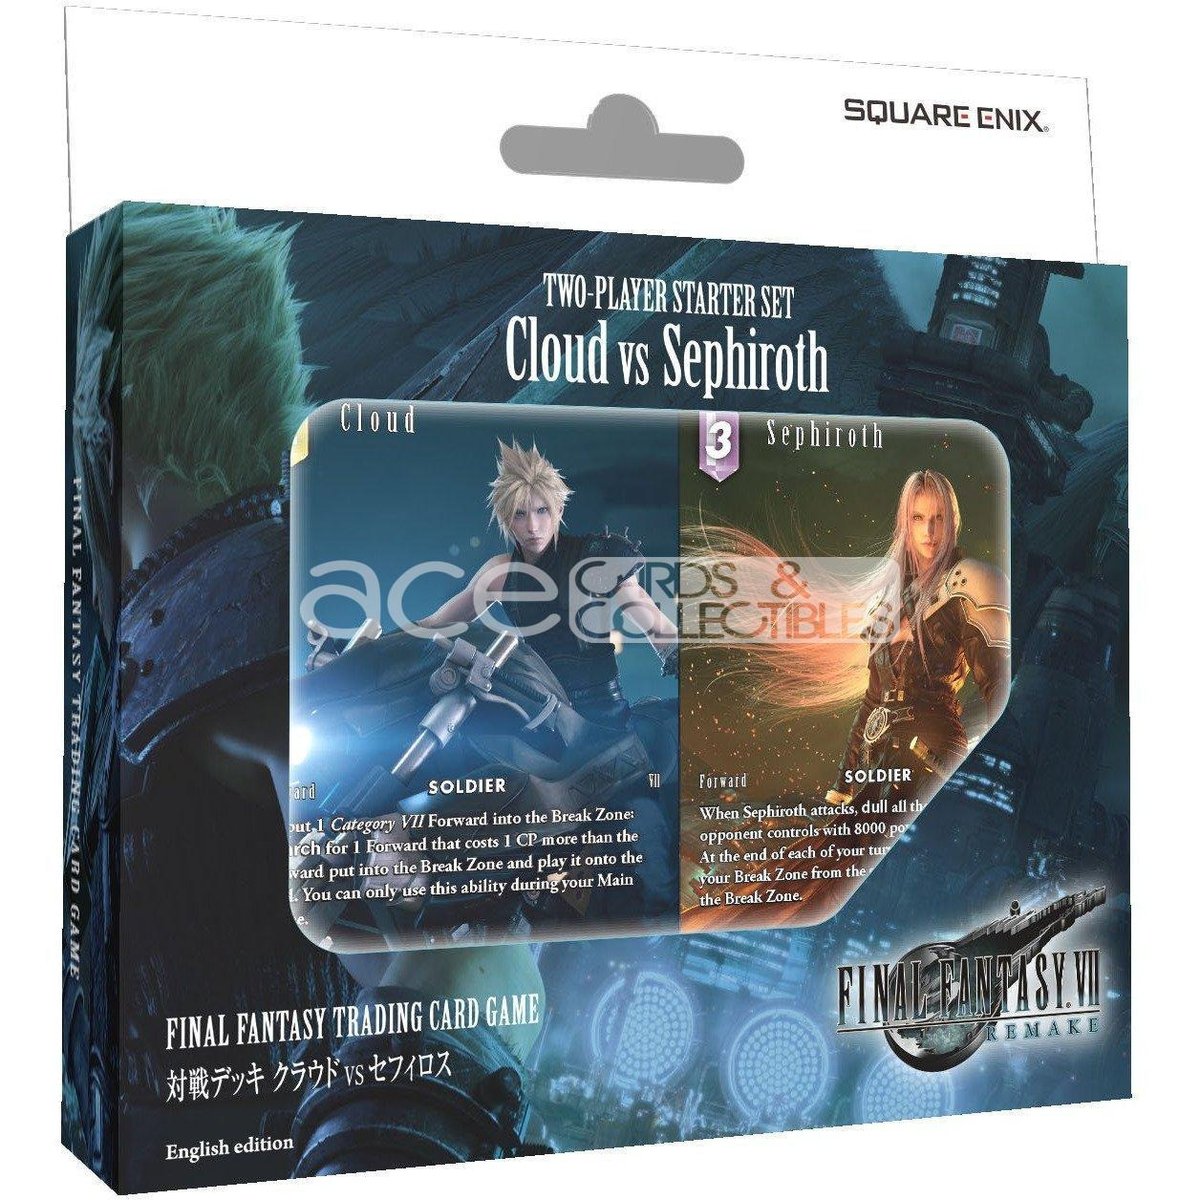 Final Fantasy TCG: Two-Player Starter Set Cloud Vs Sephiroth-Square Enix-Ace Cards & Collectibles